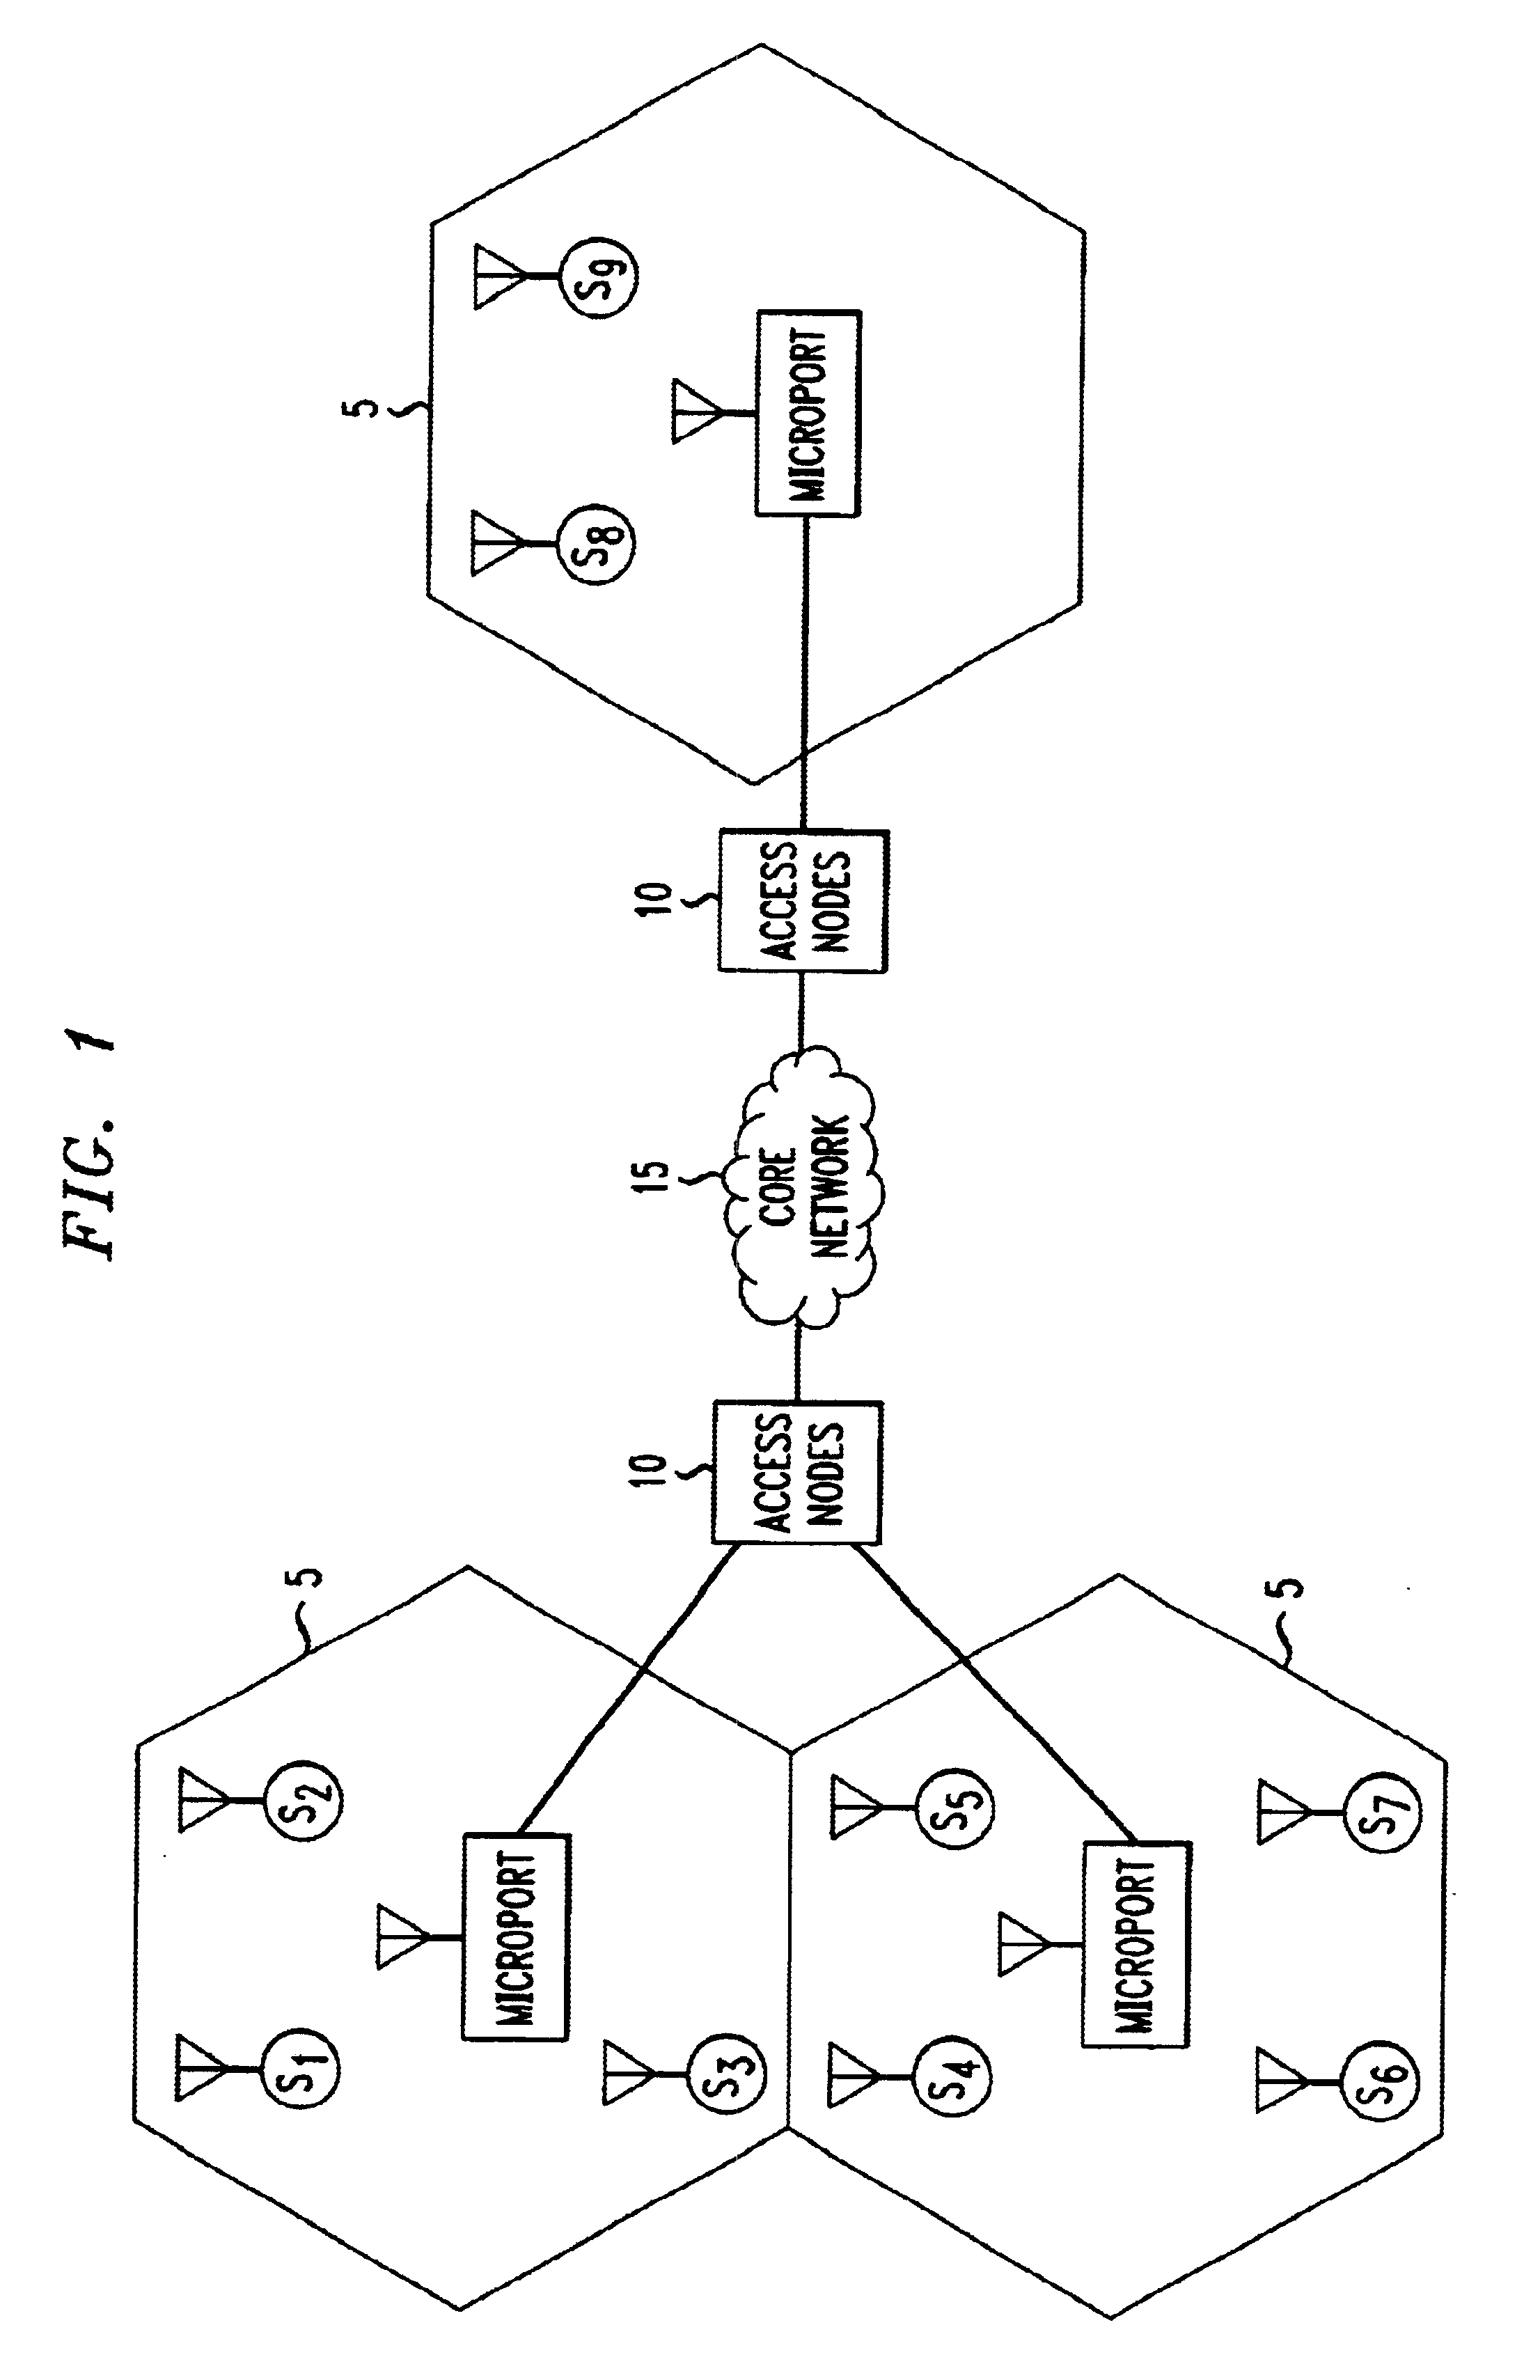 CDMA to packet-switching interface for code division switching in a terrestrial wireless system